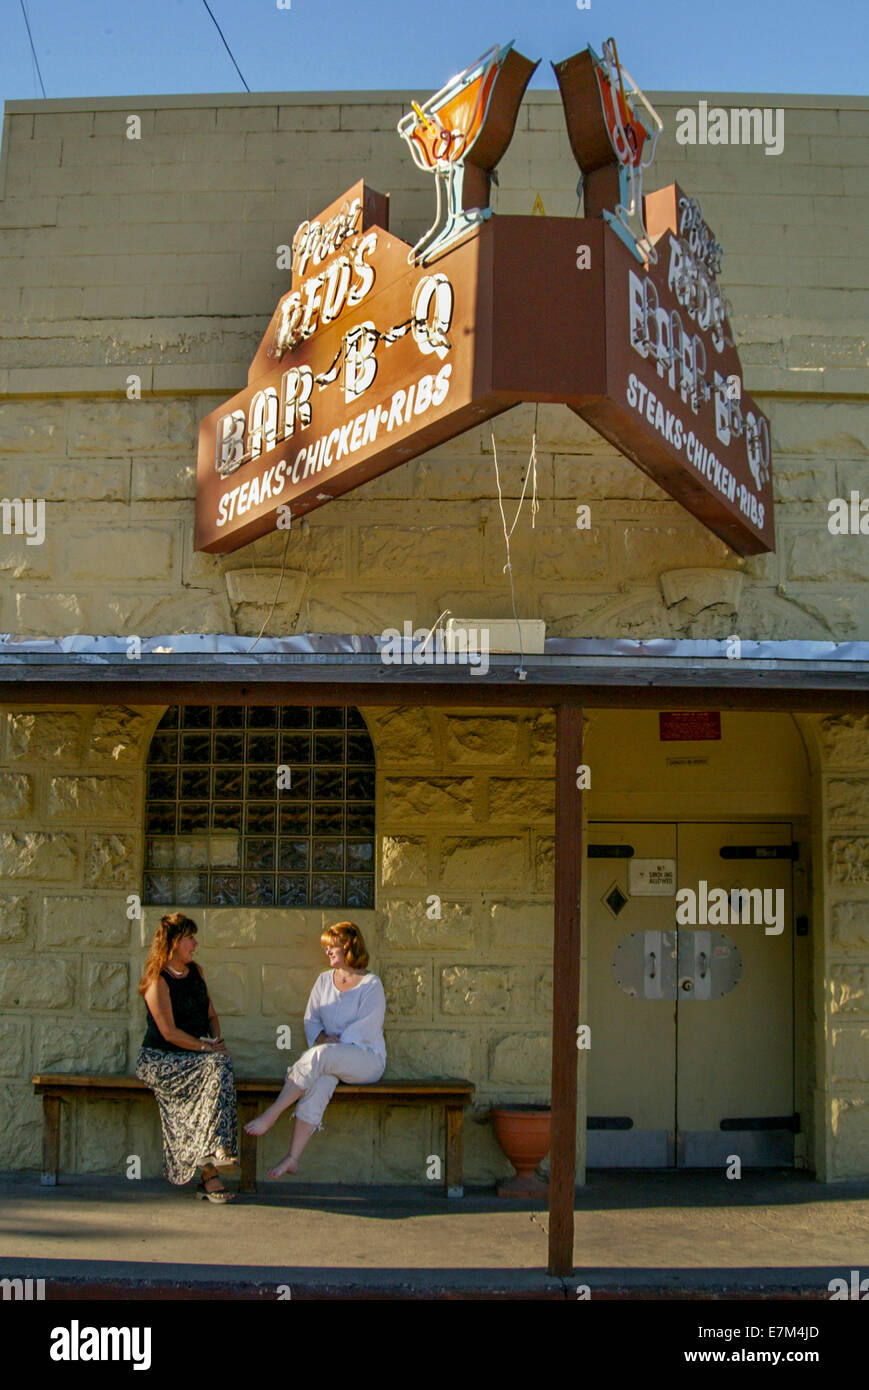 In late afternoon sun, two women talk while waiting for a bar-b-q restaurant to open in rural Diamond Springs, CA. Note cocktail sign. Stock Photo